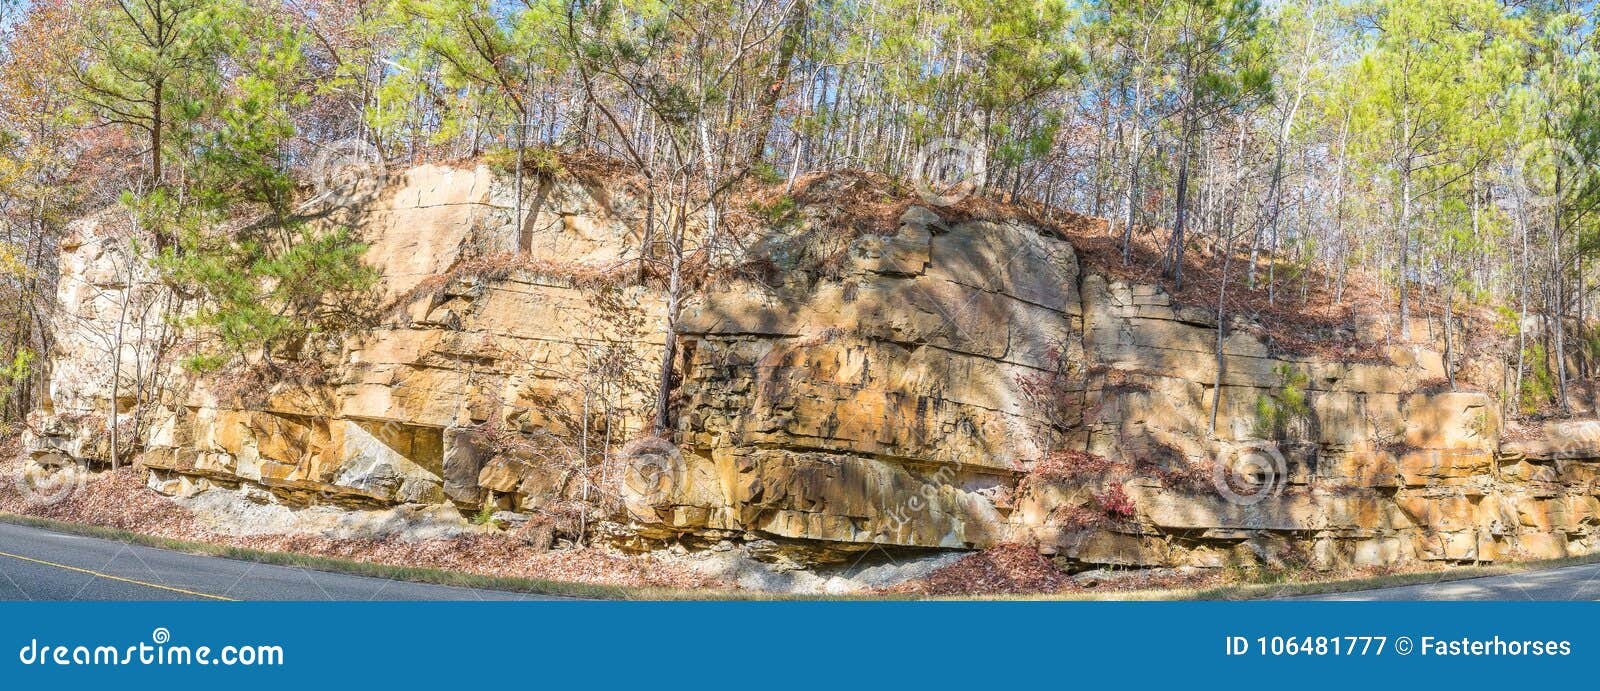 rock outcroppings along the natchez trace parkway.